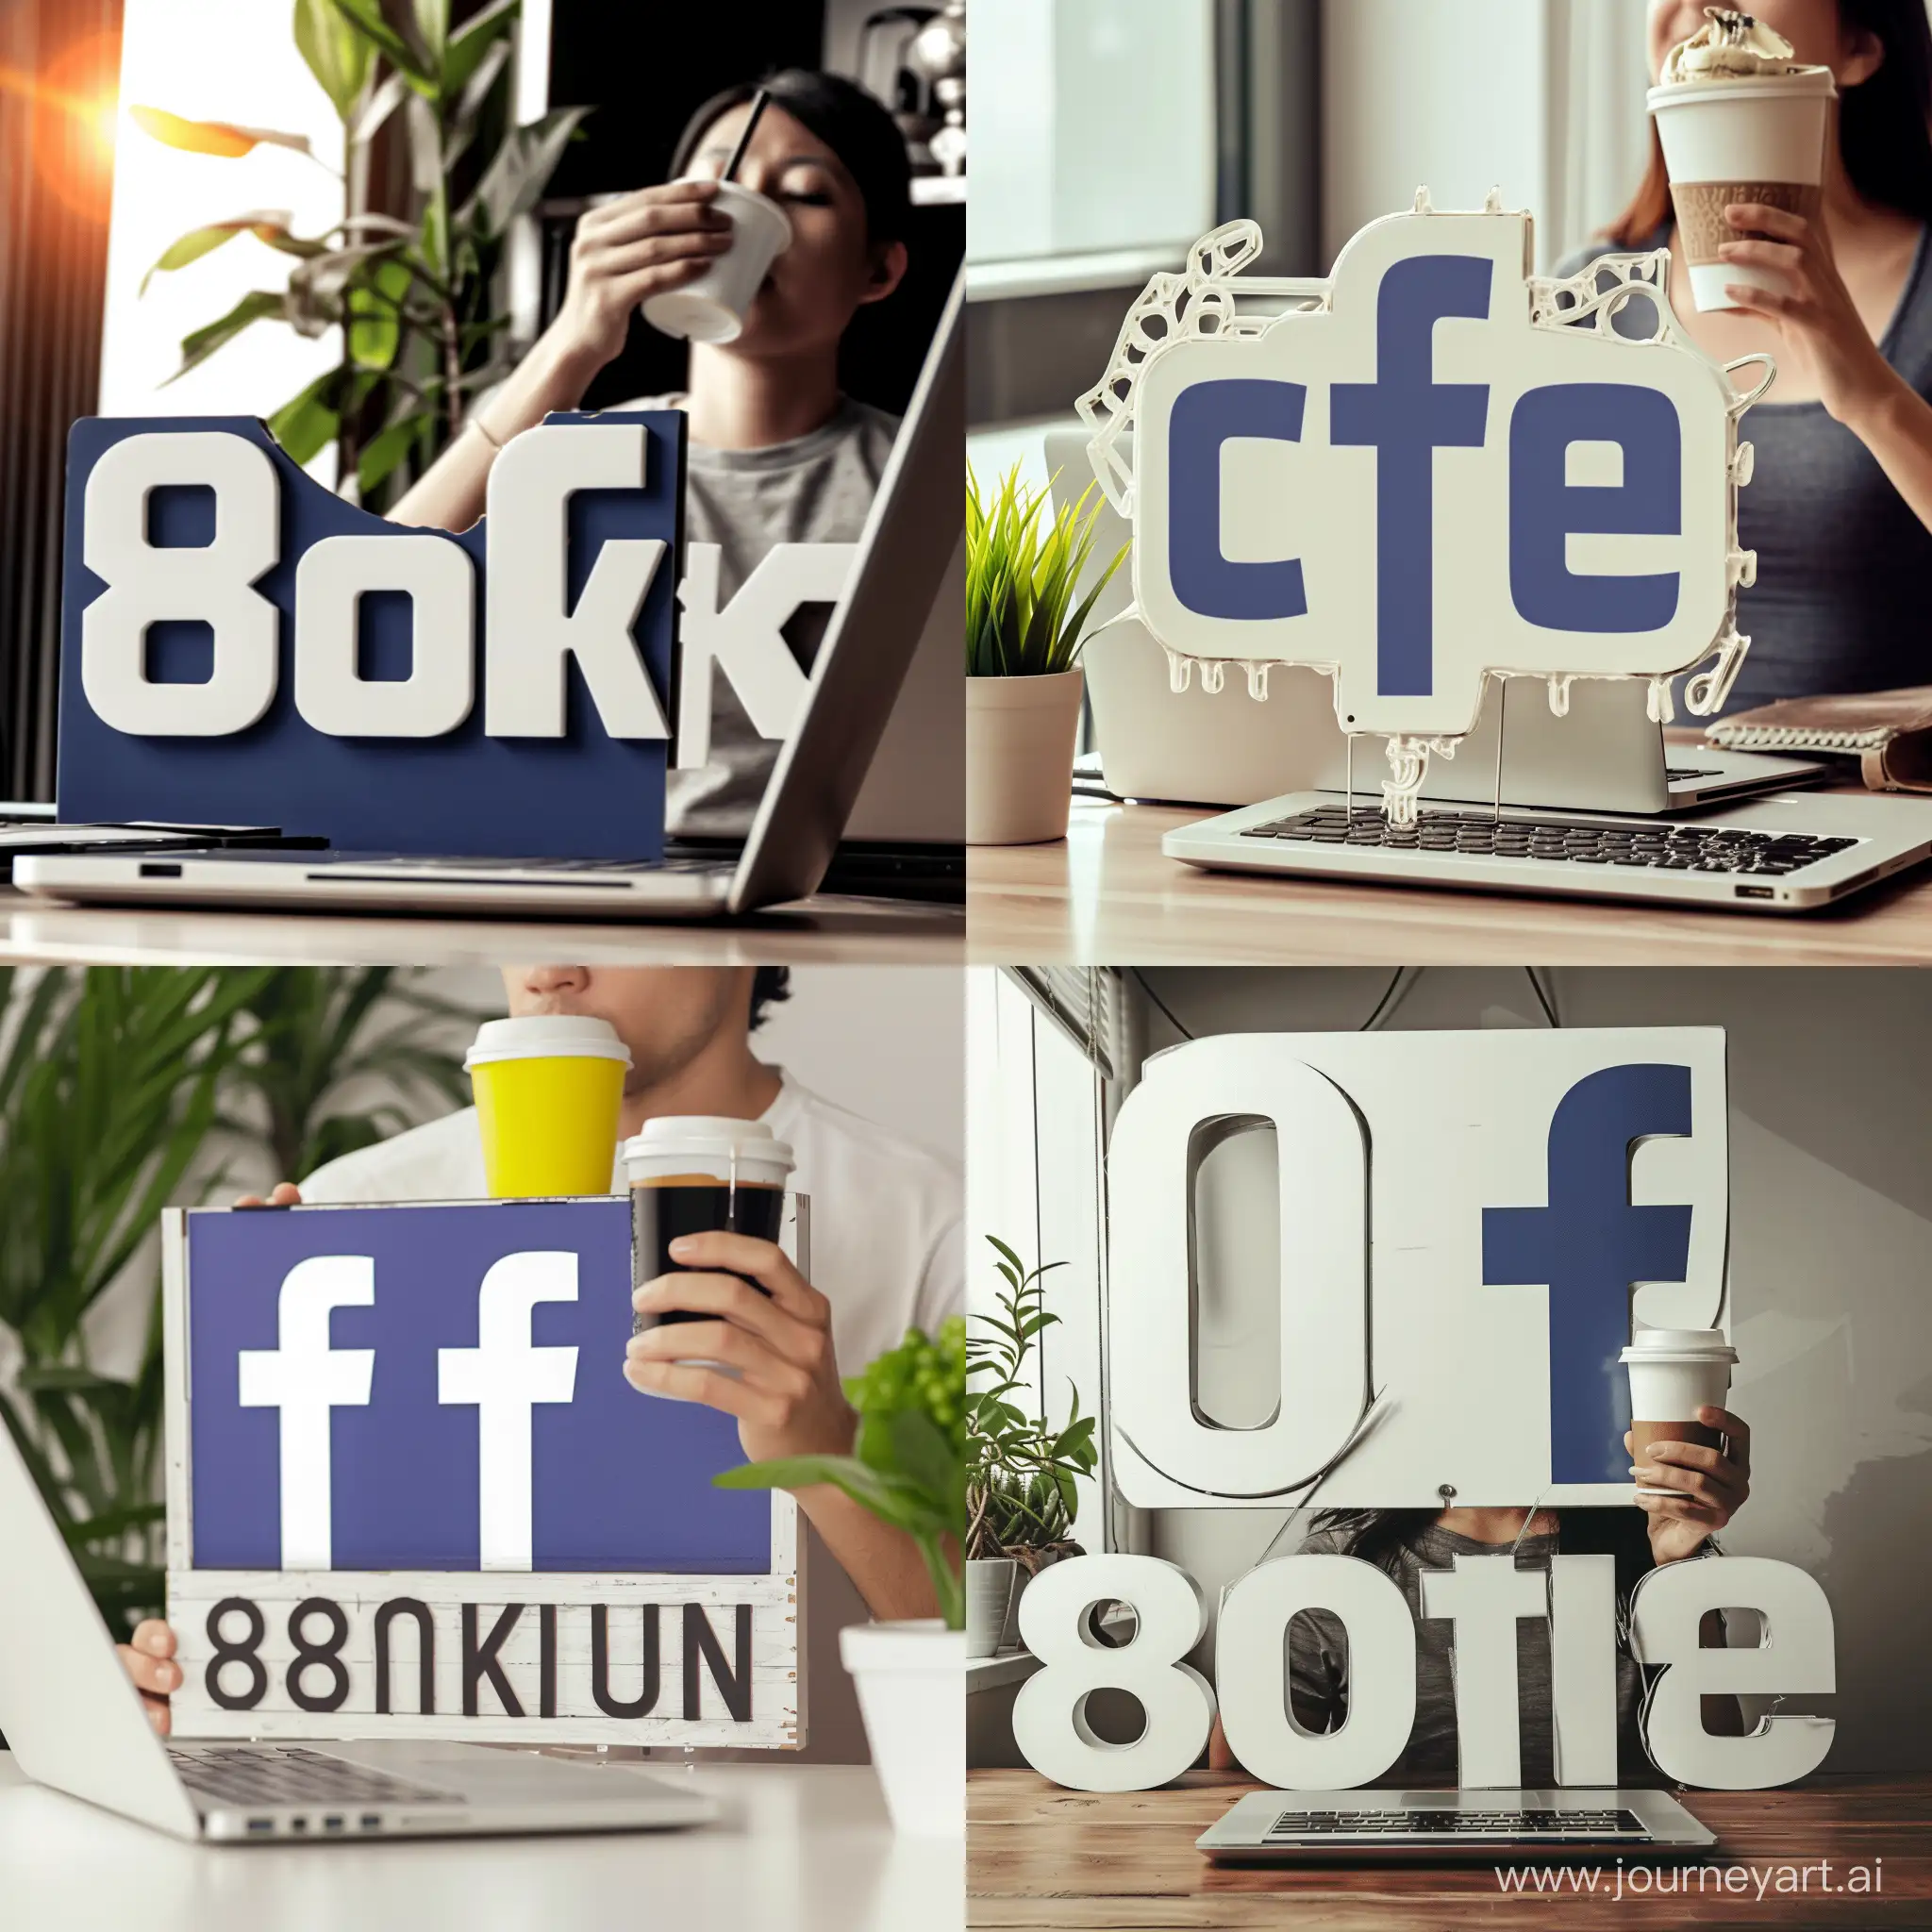 A person behind the Facebook sign sits in a desk with a laptop and sipping 8k coffee